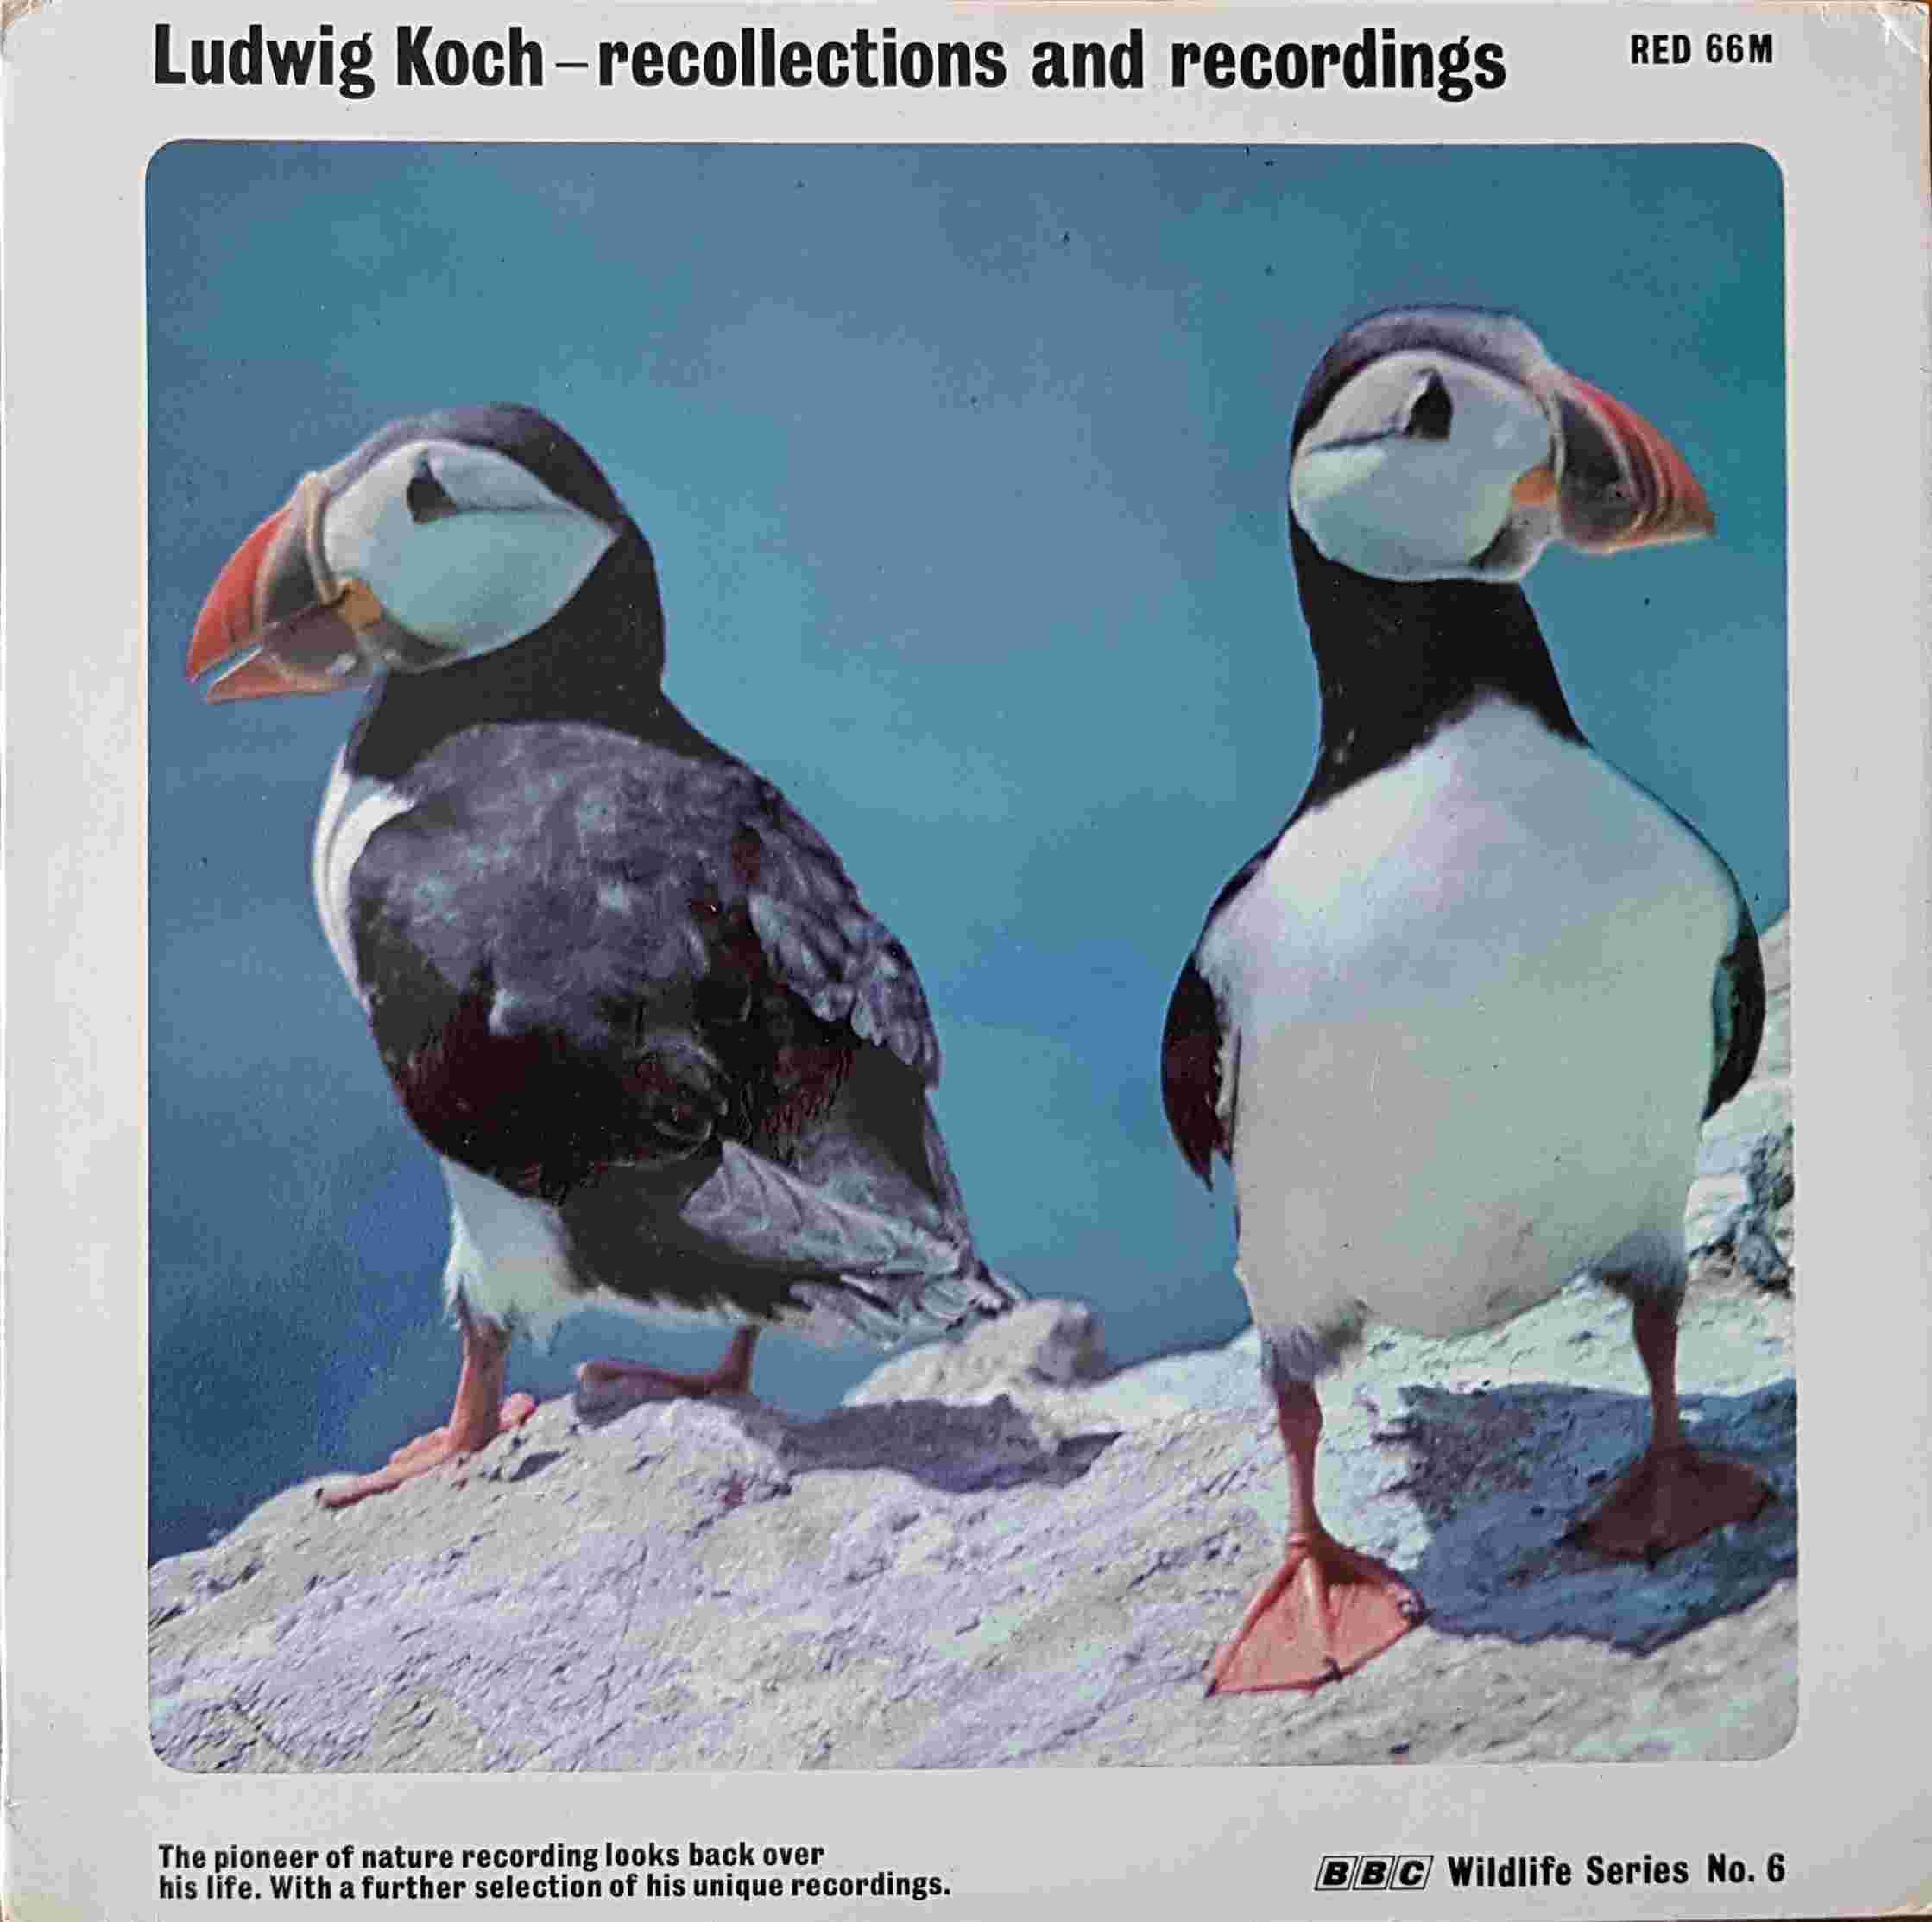 Picture of RED 66 Recollections and recordings - BBC Wildlife series no. 6 by artist Ludwig Koch from the BBC albums - Records and Tapes library